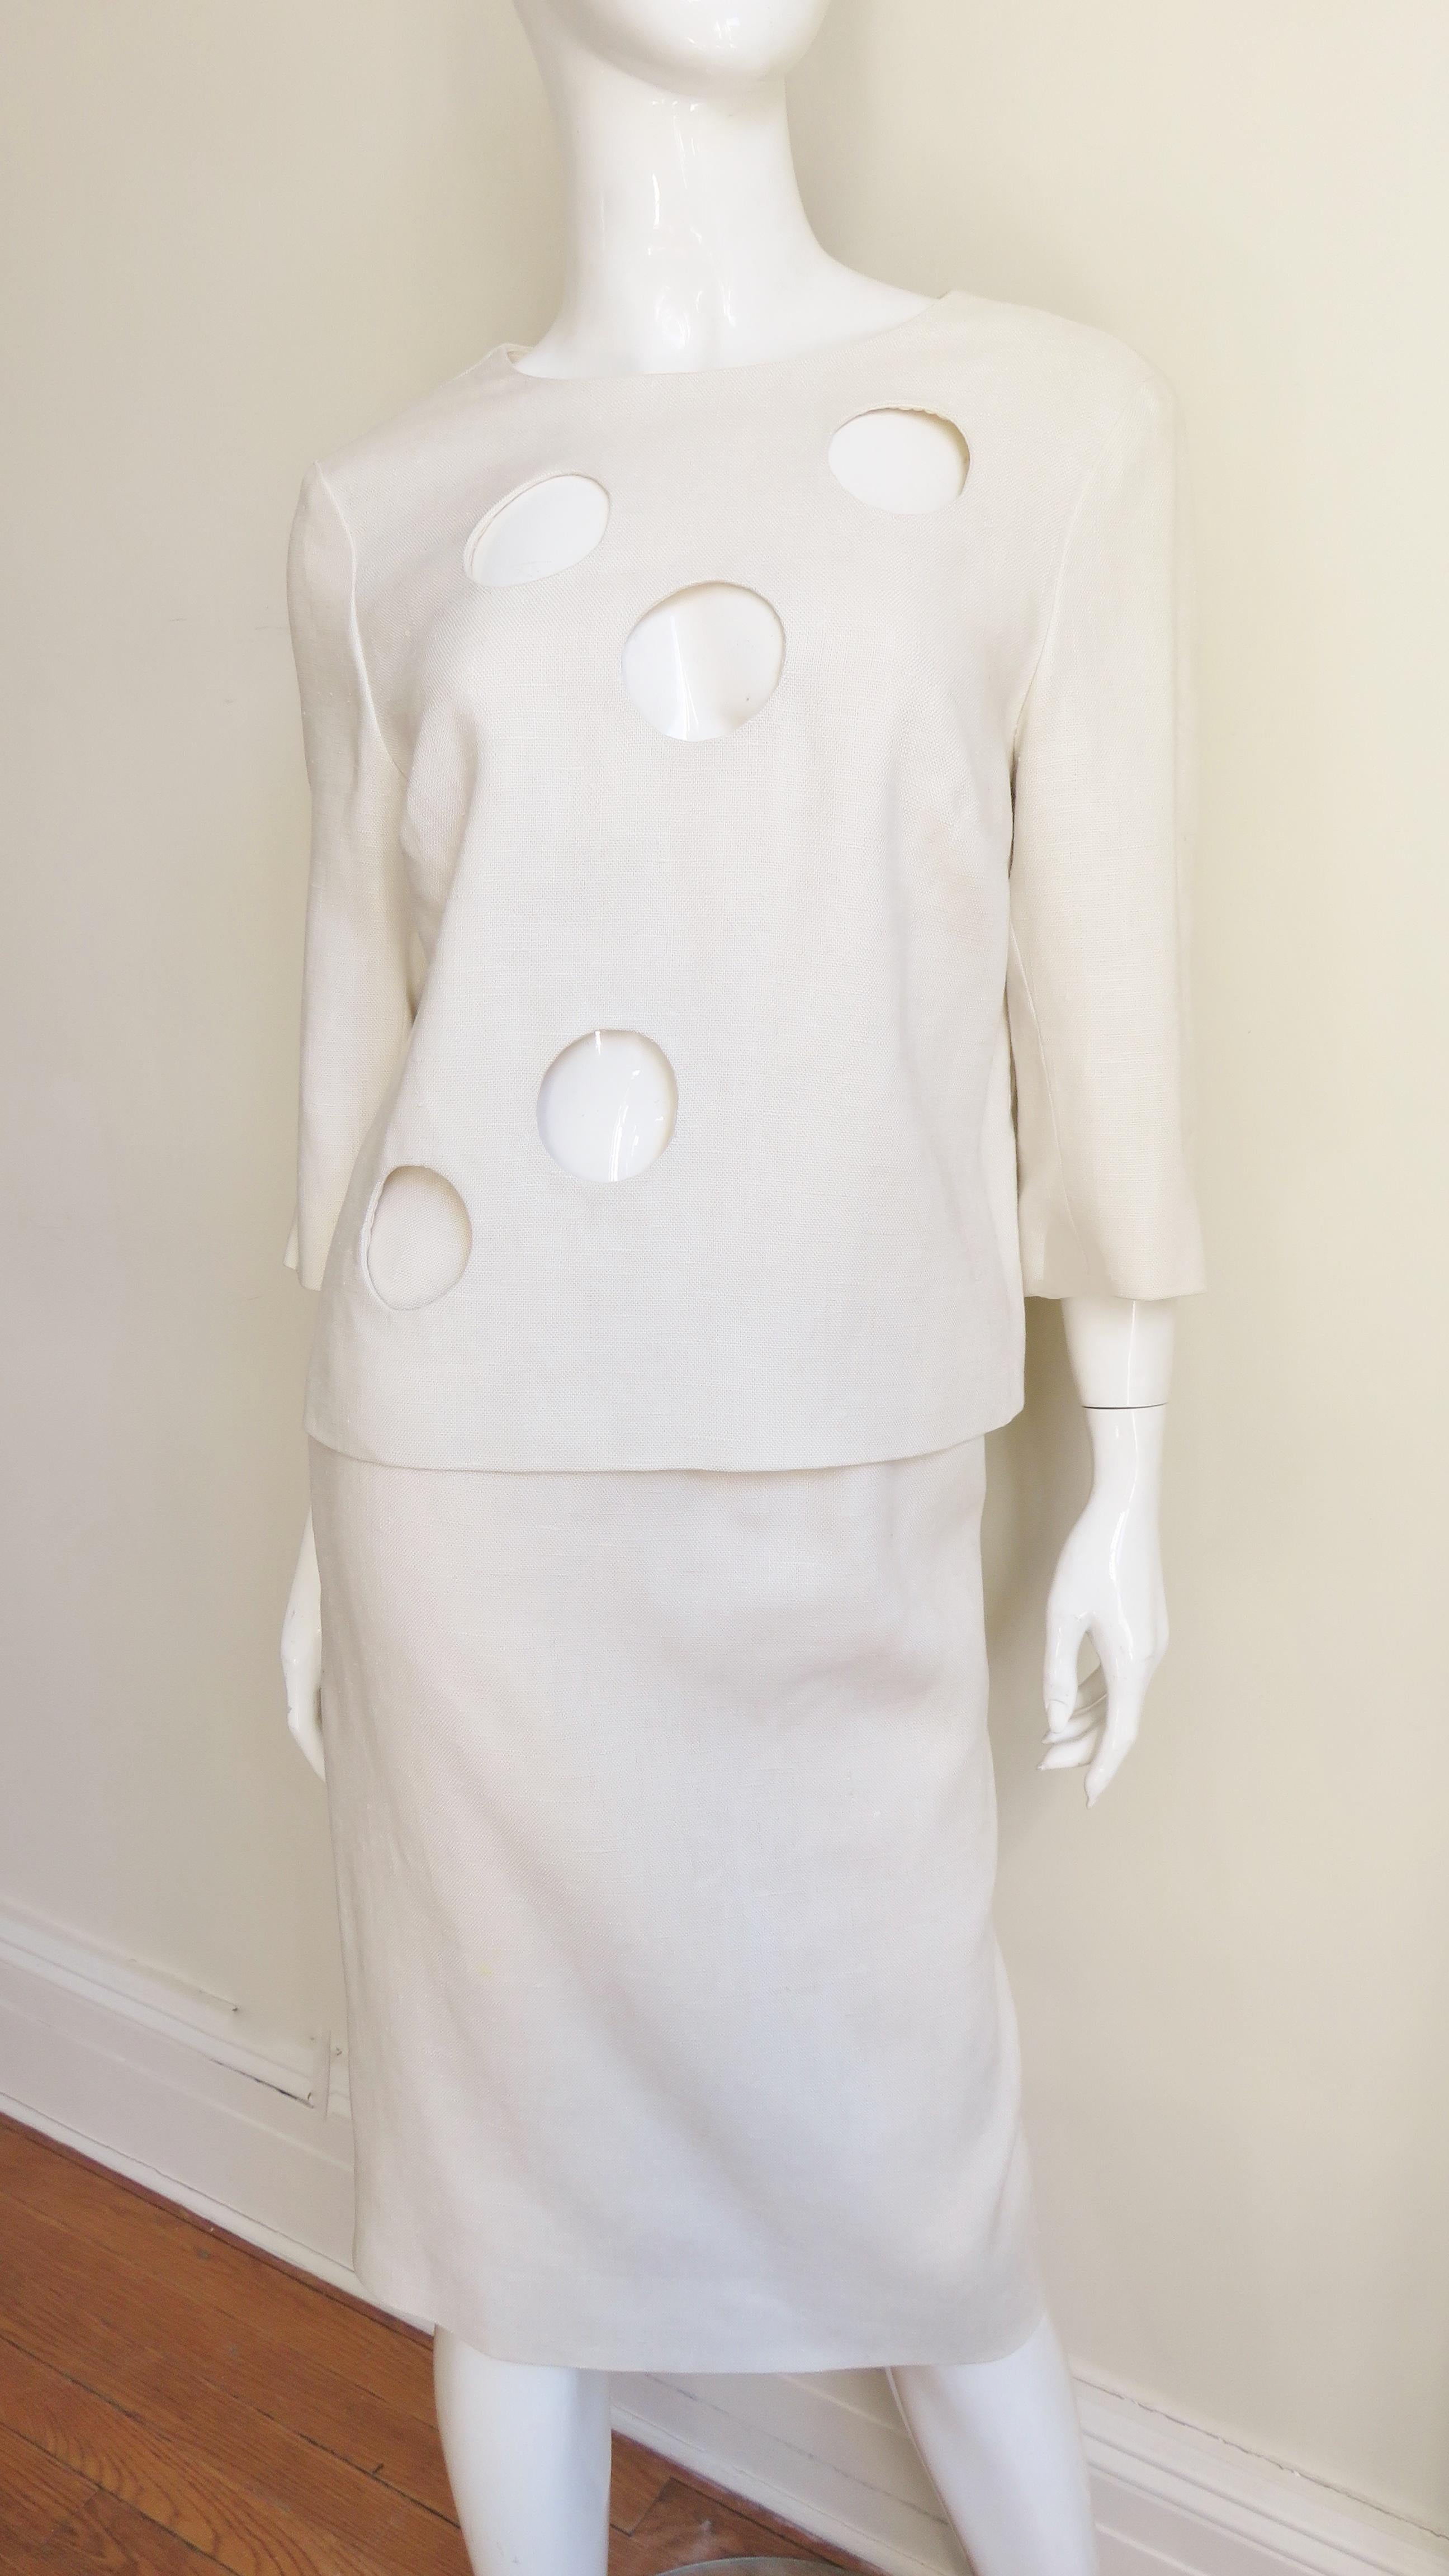 A fabulous off white mid weight linen top and skirt set from B H Wragge dated 1964 on the label. The hip length top has a crew neckline, 3/4 sleeves, a back zipper closure and fabulous circle cut outs on the front. The straight skirt has a waistband